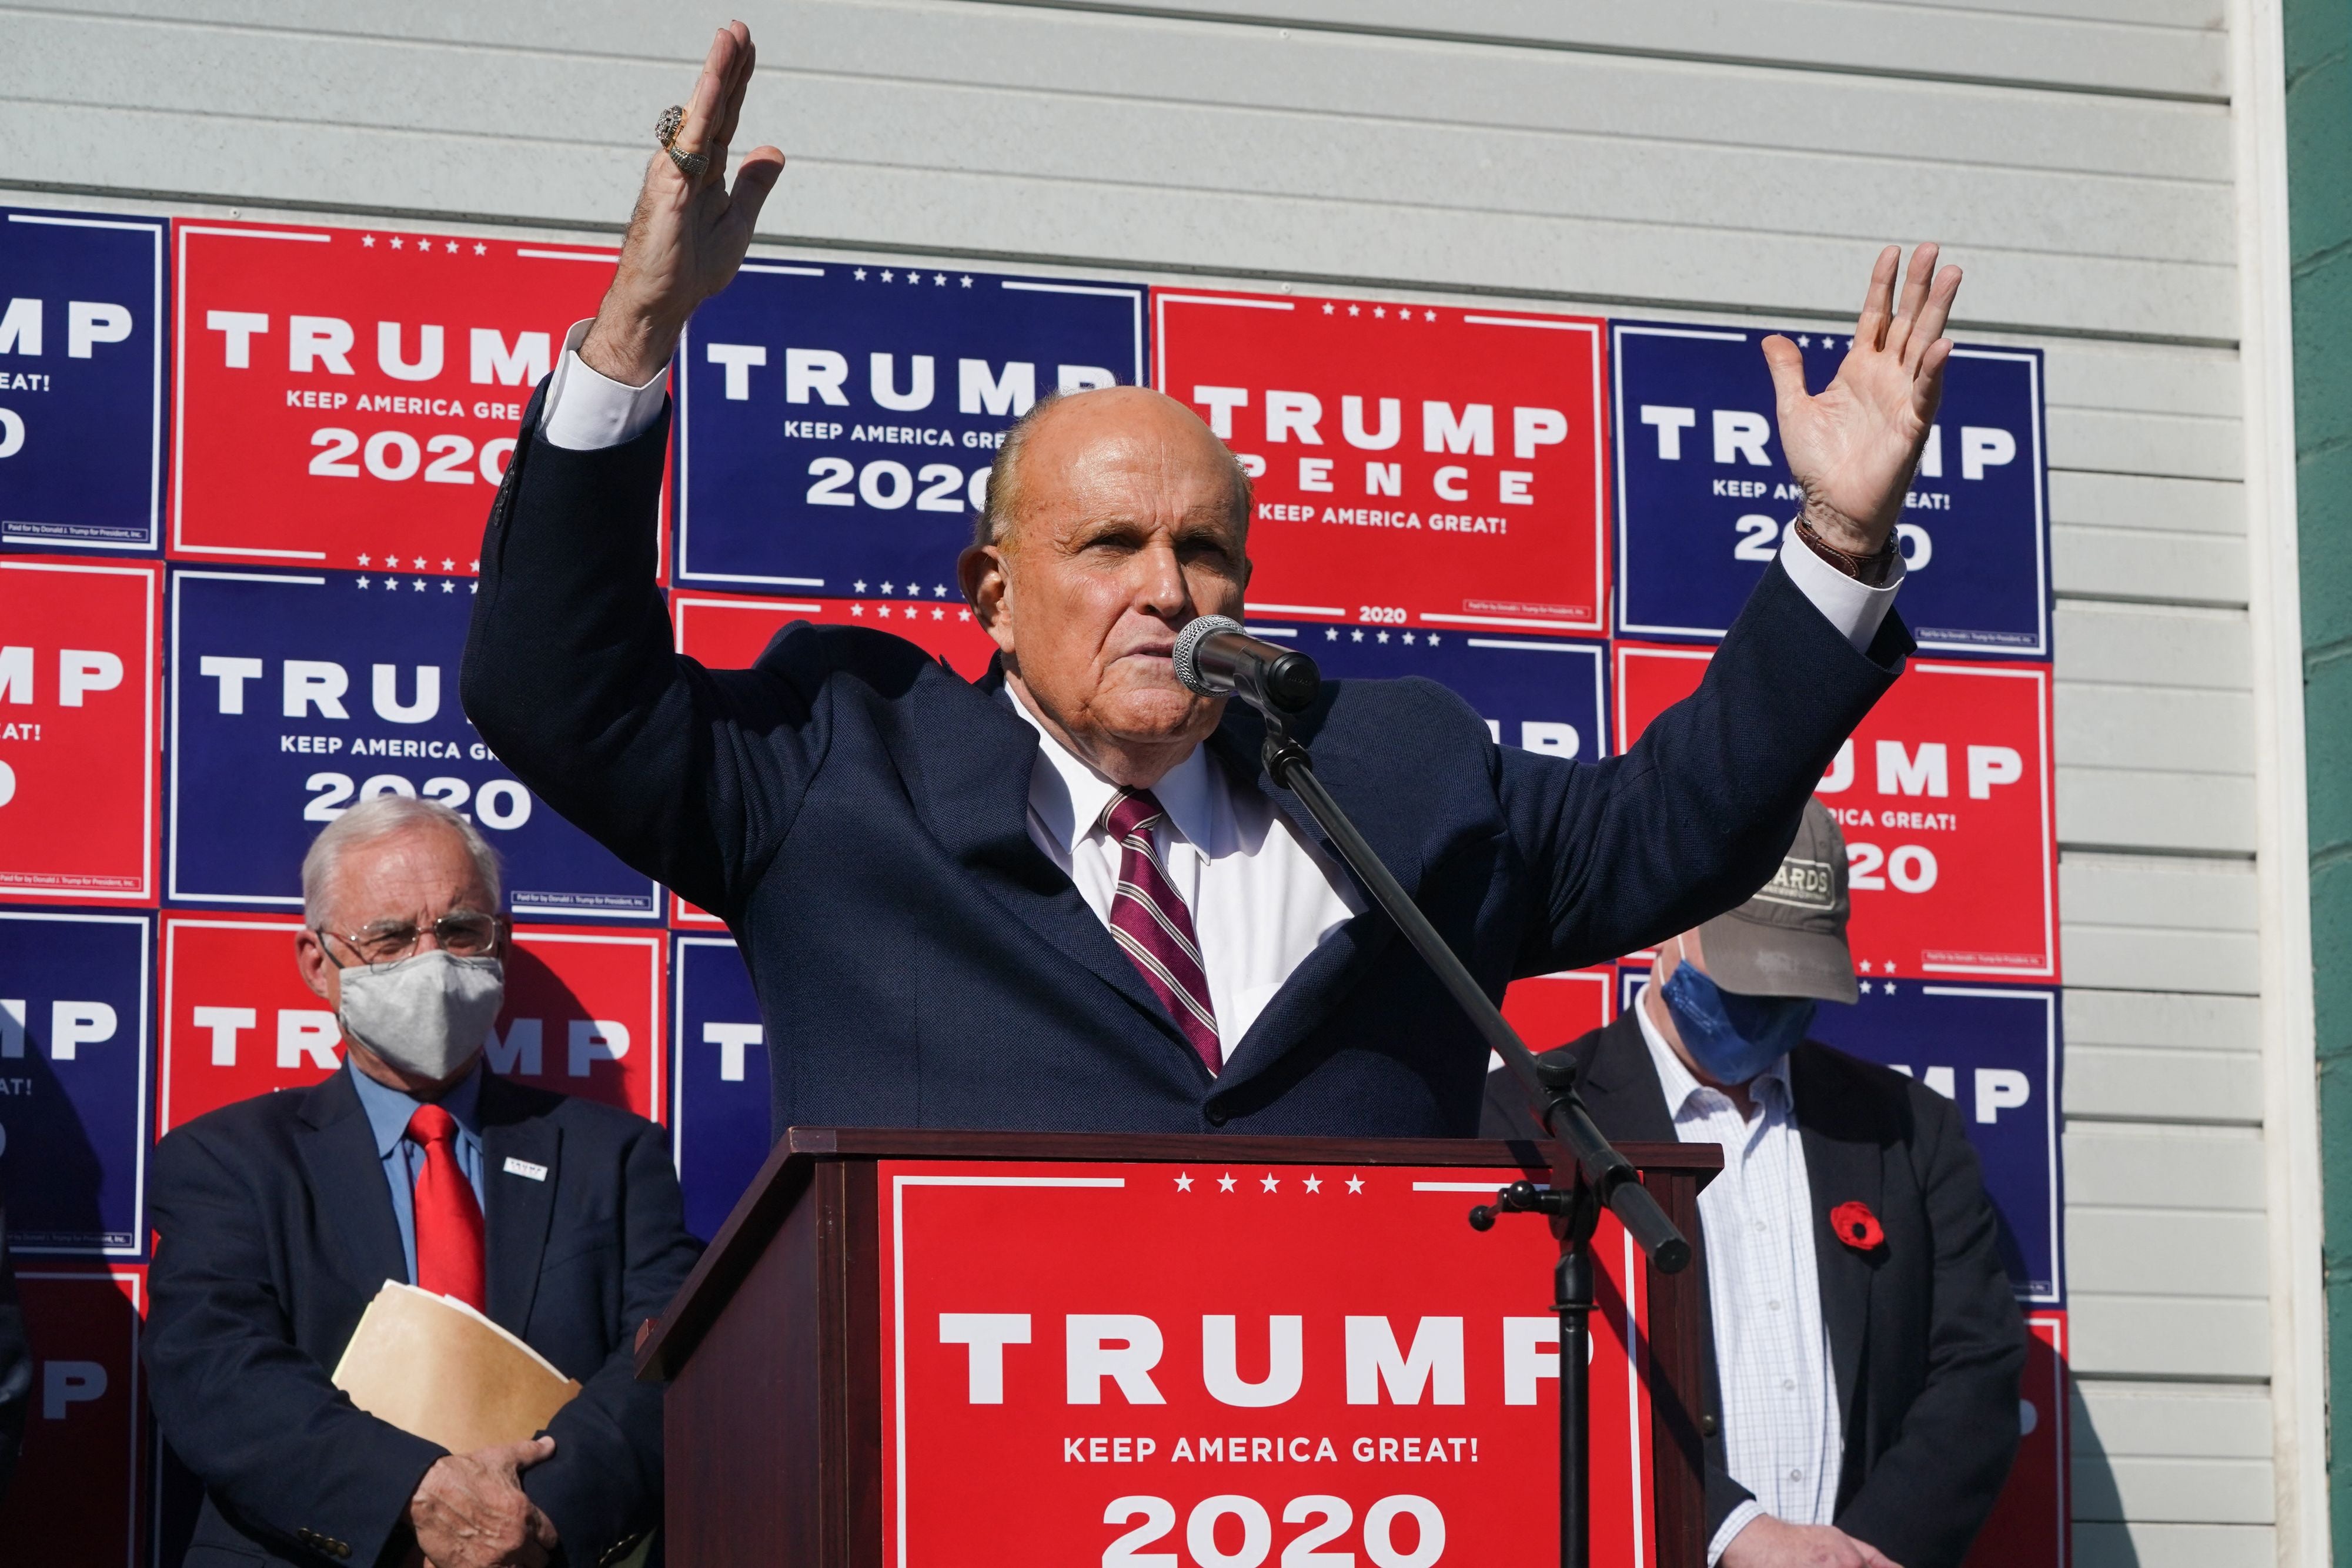 Rudy Giuliani, speaks at a news conference in the parking lot of a landscaping company in Philadelphia in November 2020